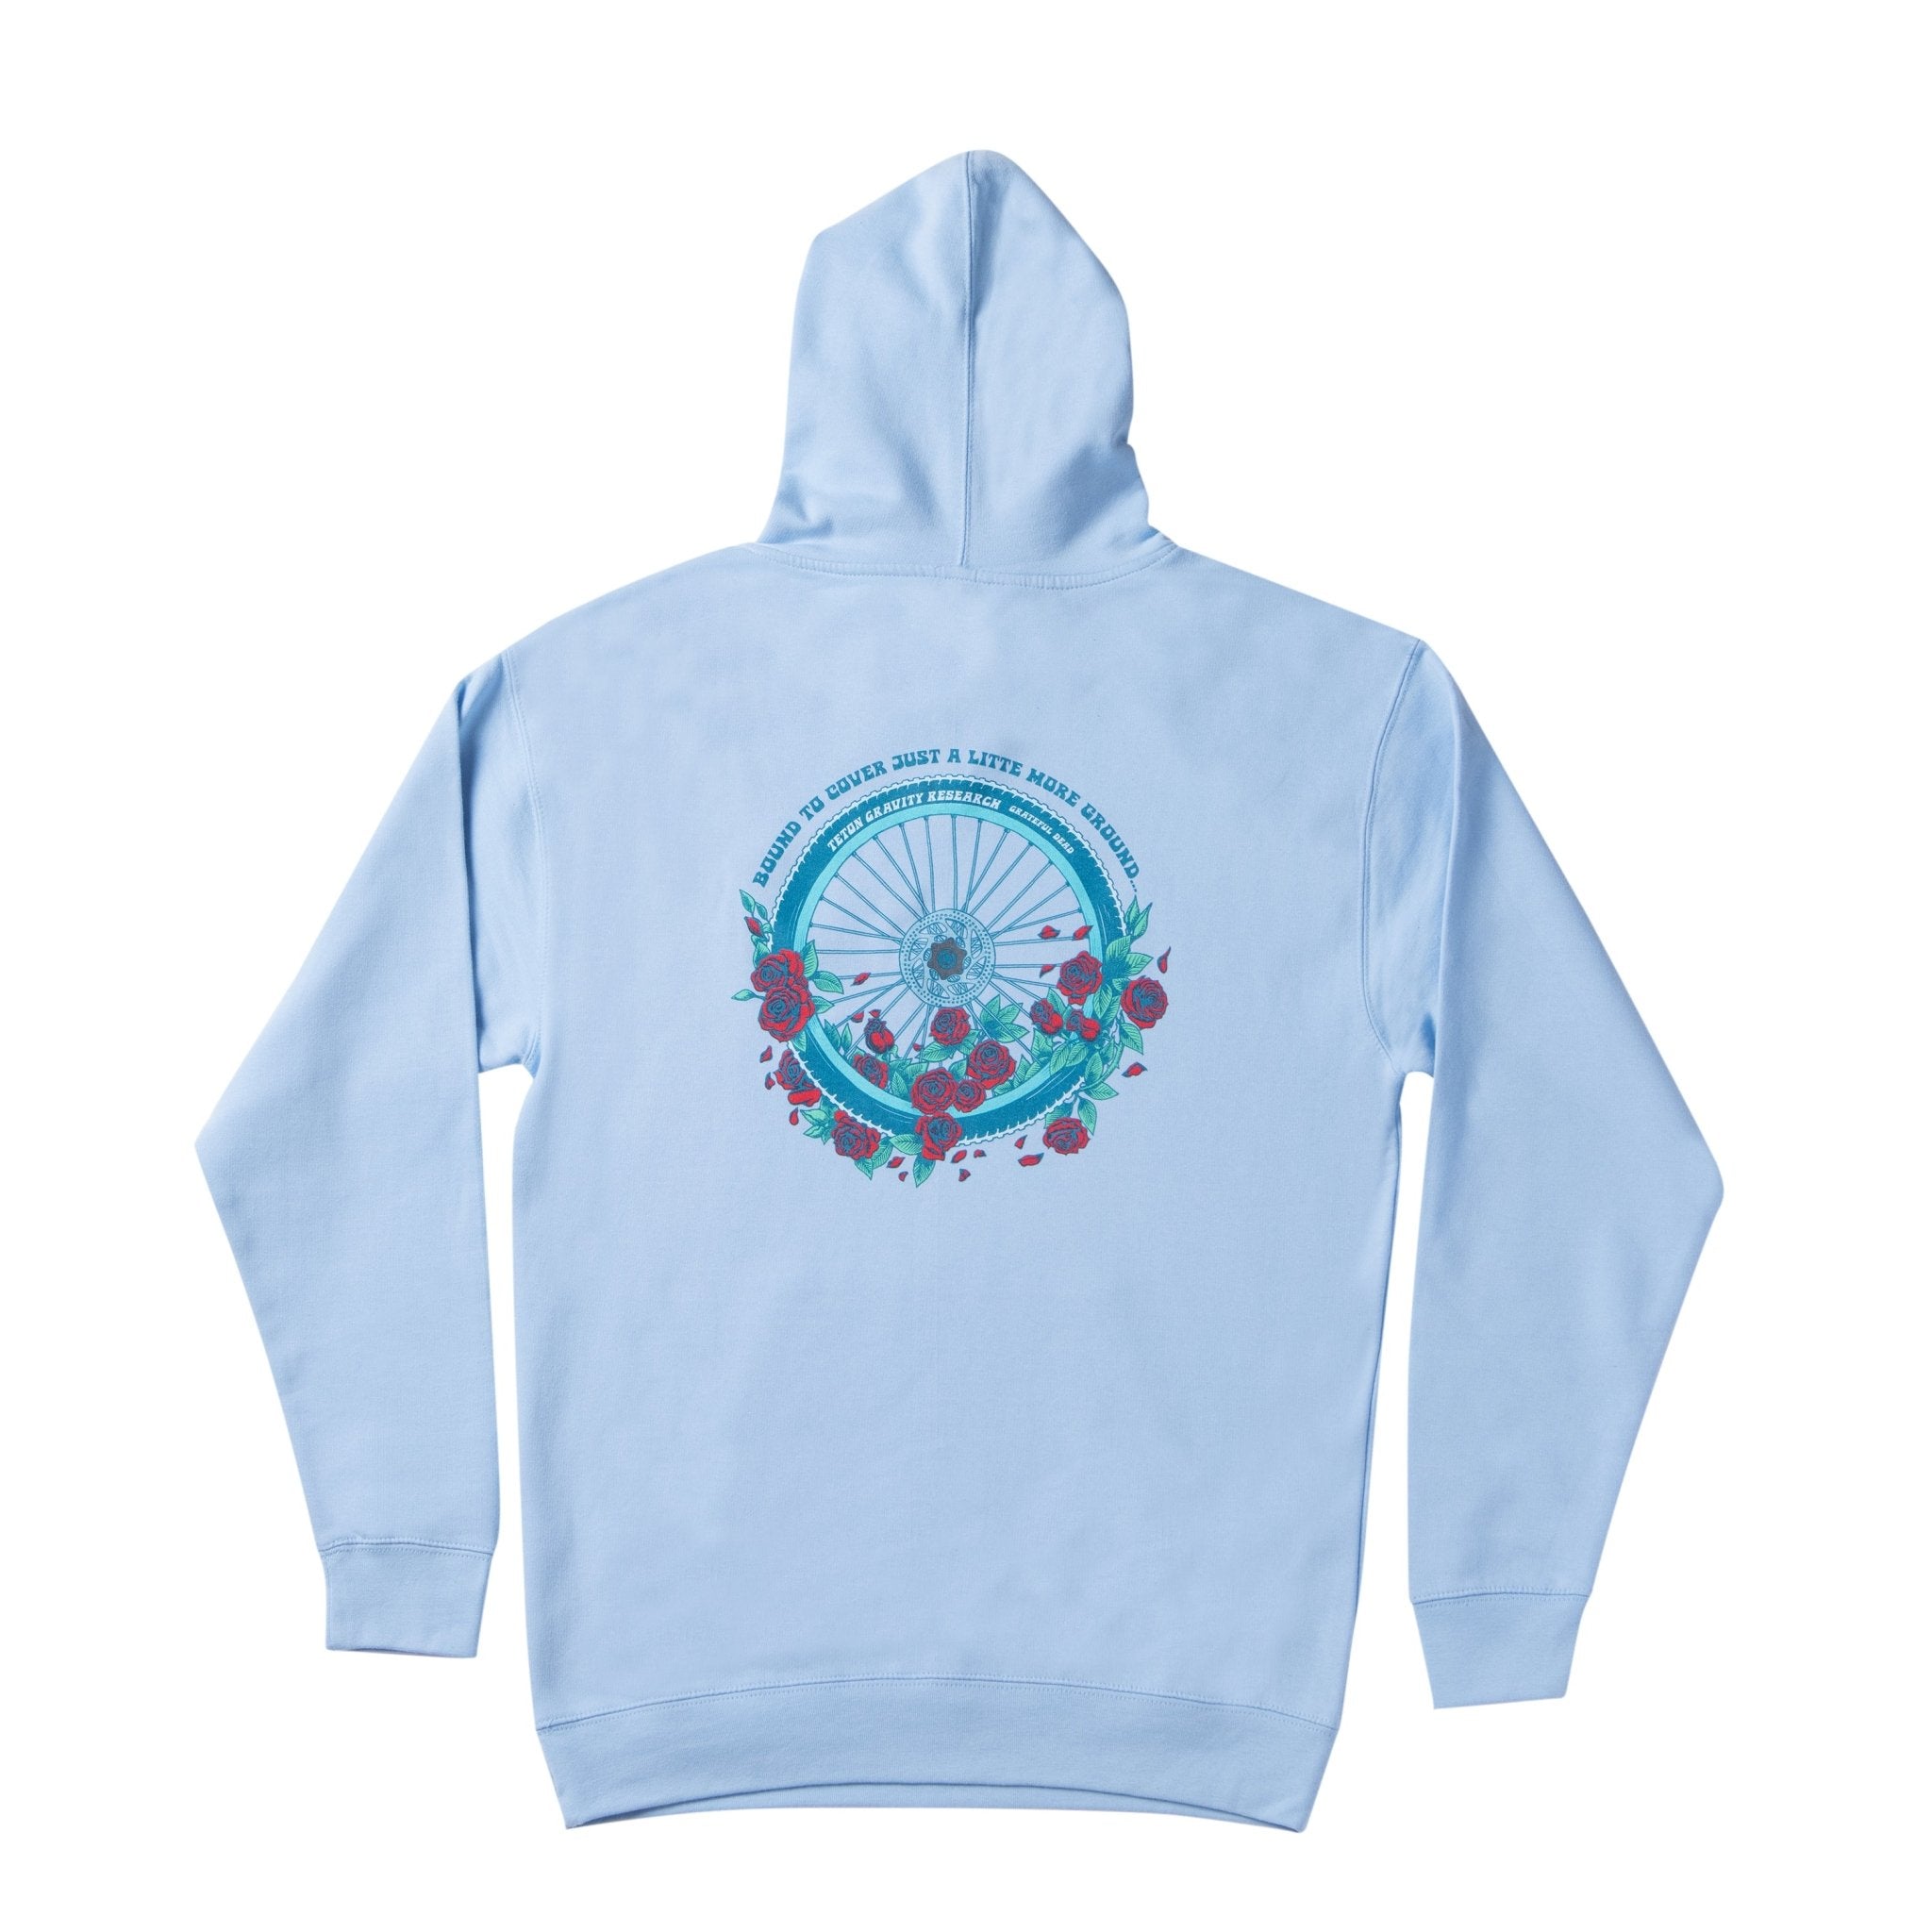 Grateful Dead x TGR “Bound to Cover Just a Little More Ground” Hoodie by Cetana Works - Teton Gravity Research